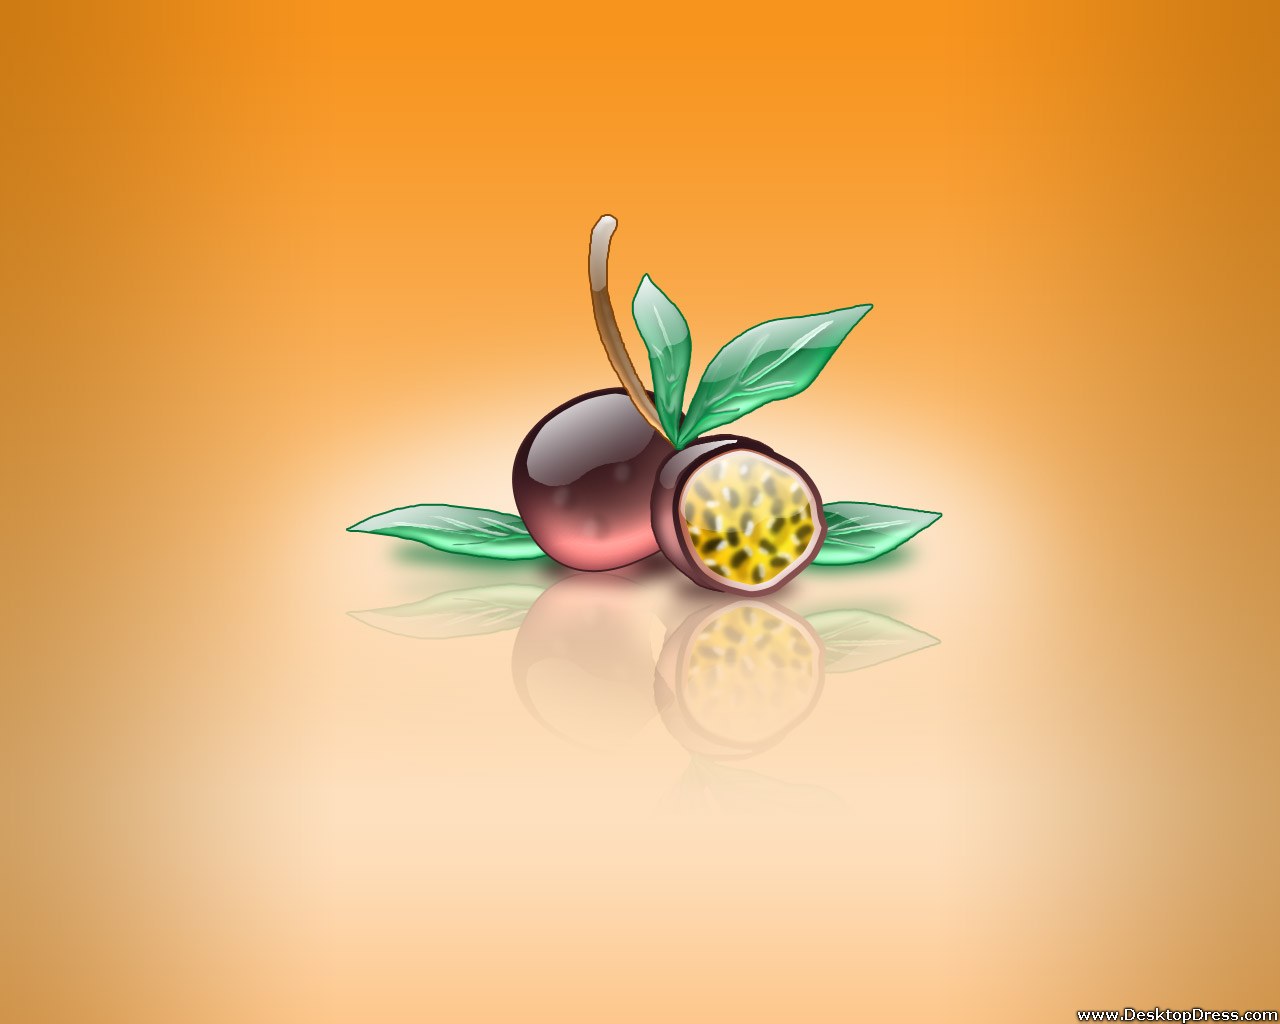 Passionfruit In Orage Background - Illustration - HD Wallpaper 